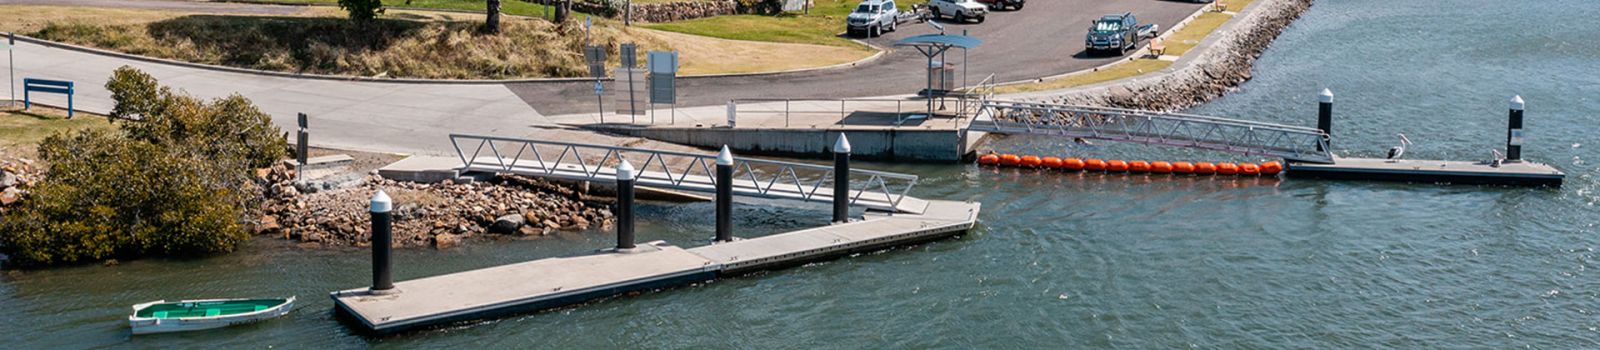 Image of a boat ramp on a river banner image